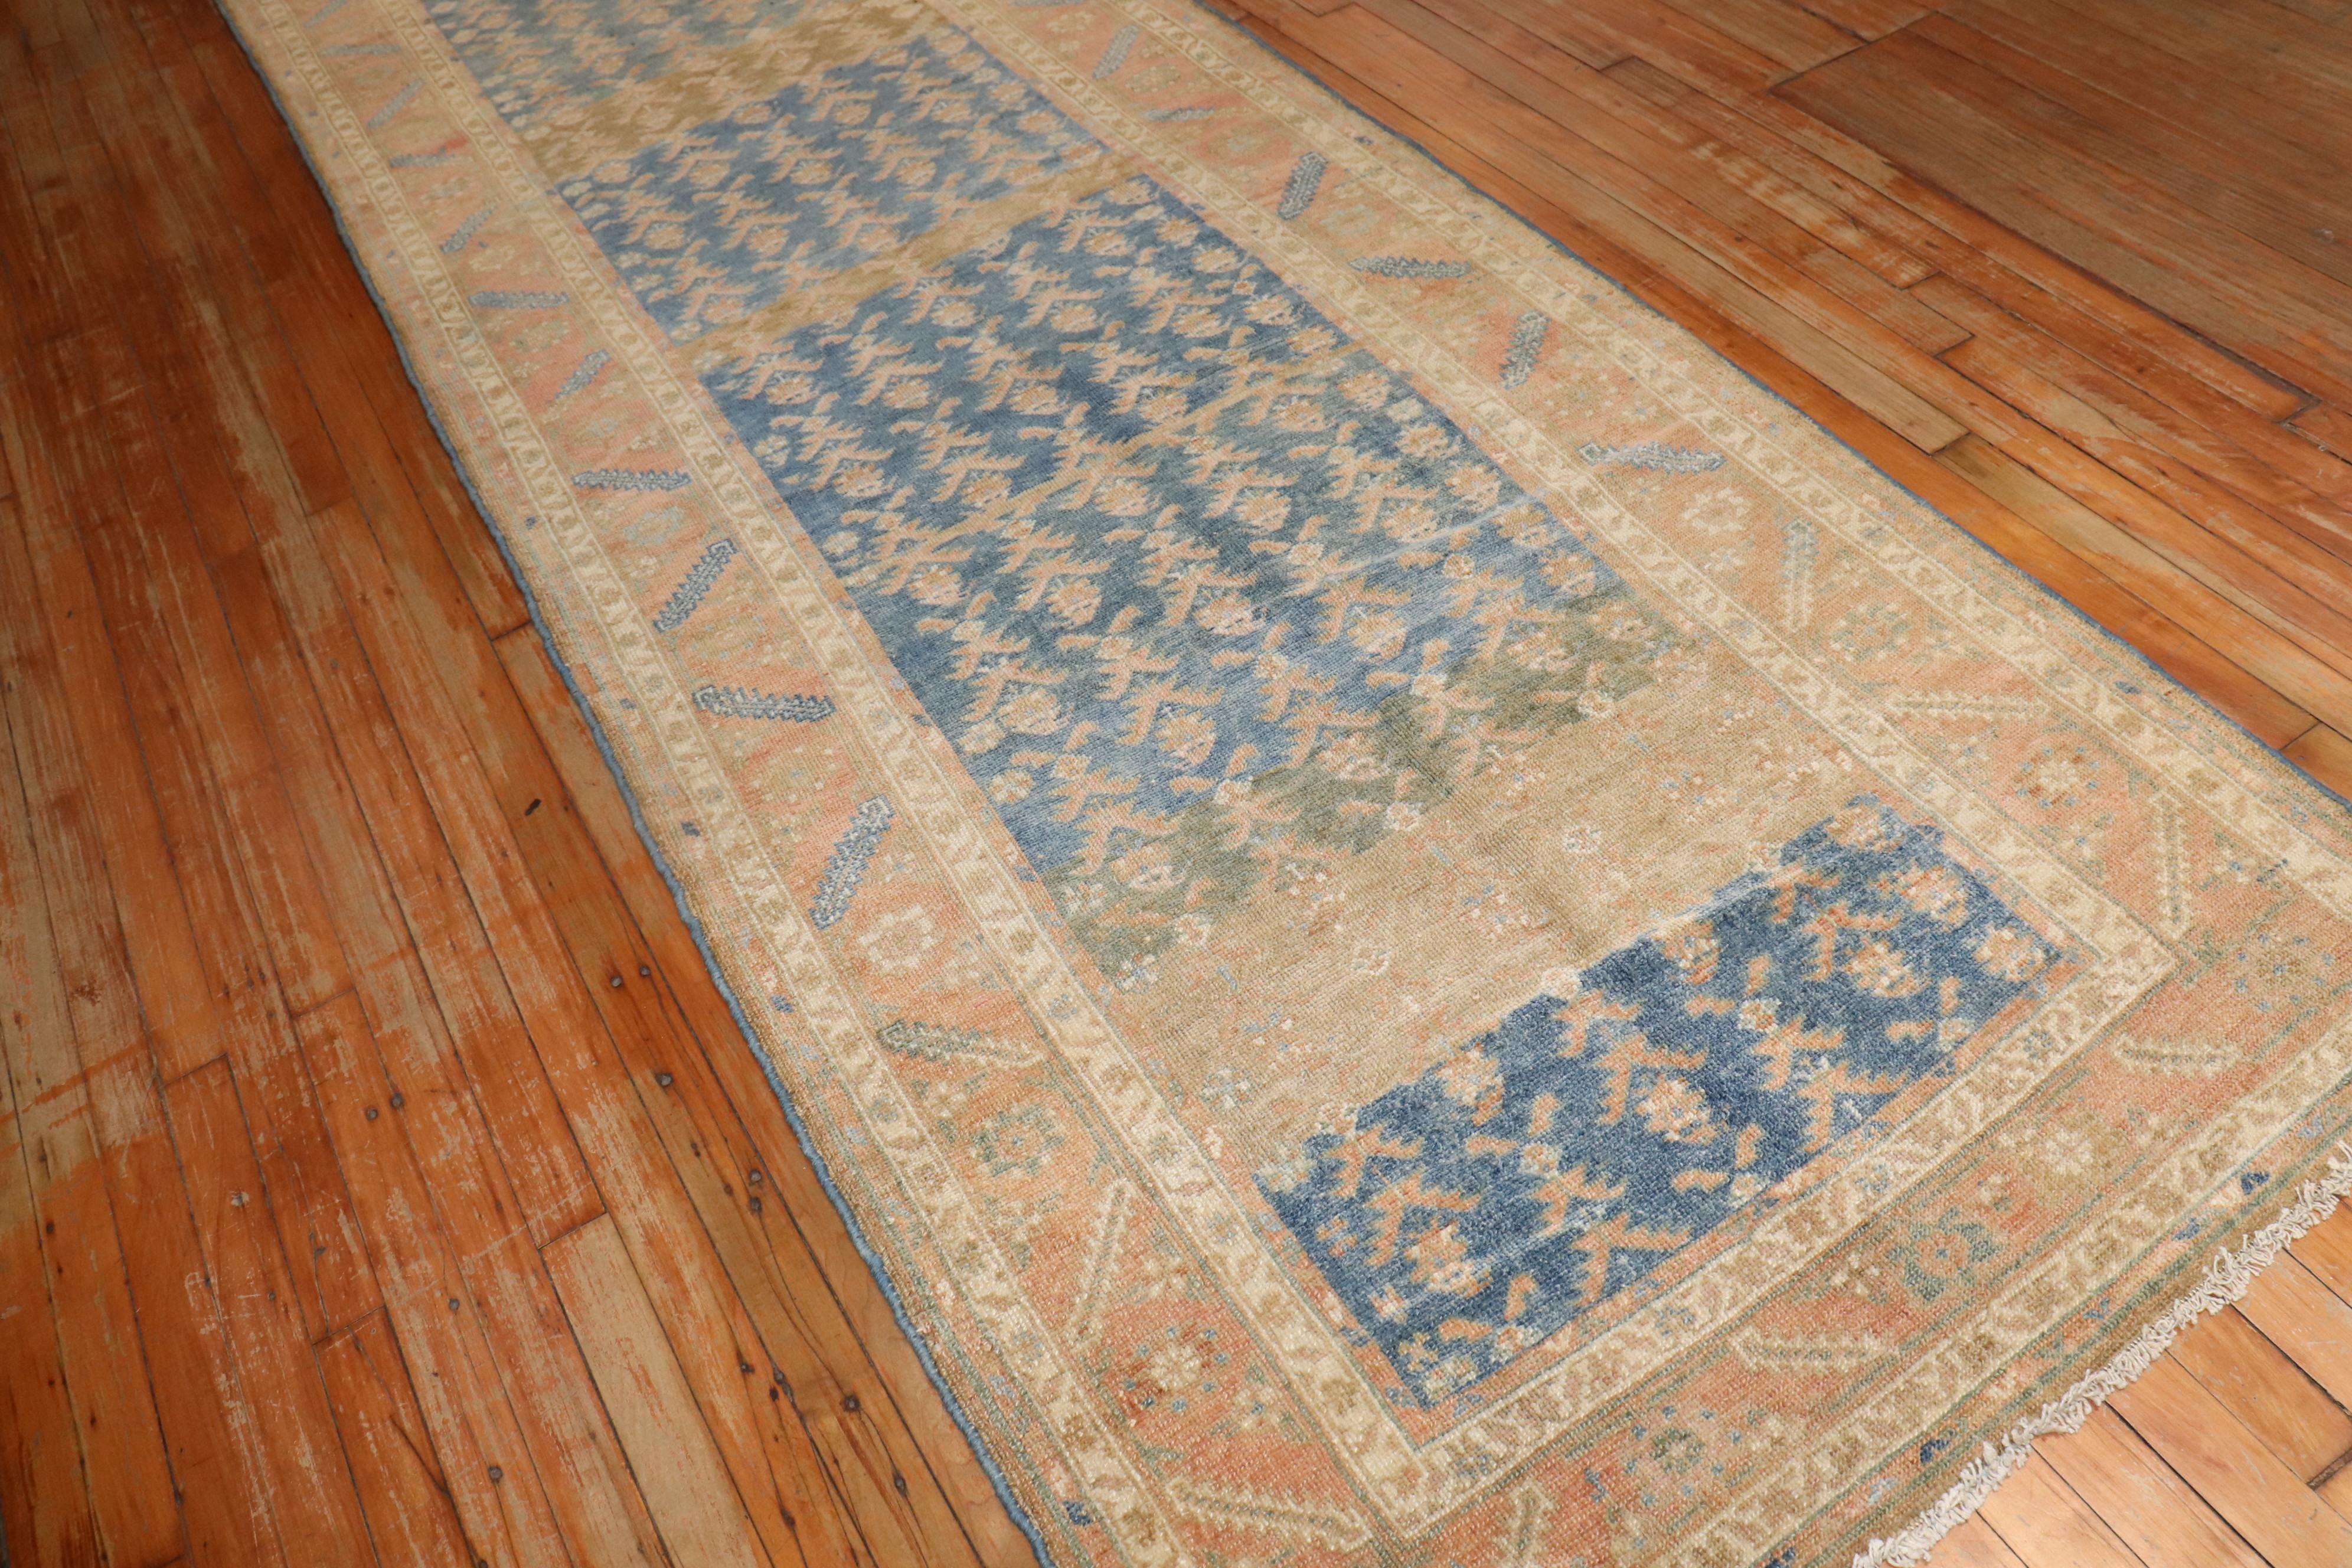 Mid 20th  wide and long Century Persian Runner with a blue striated field

Size: 3'8